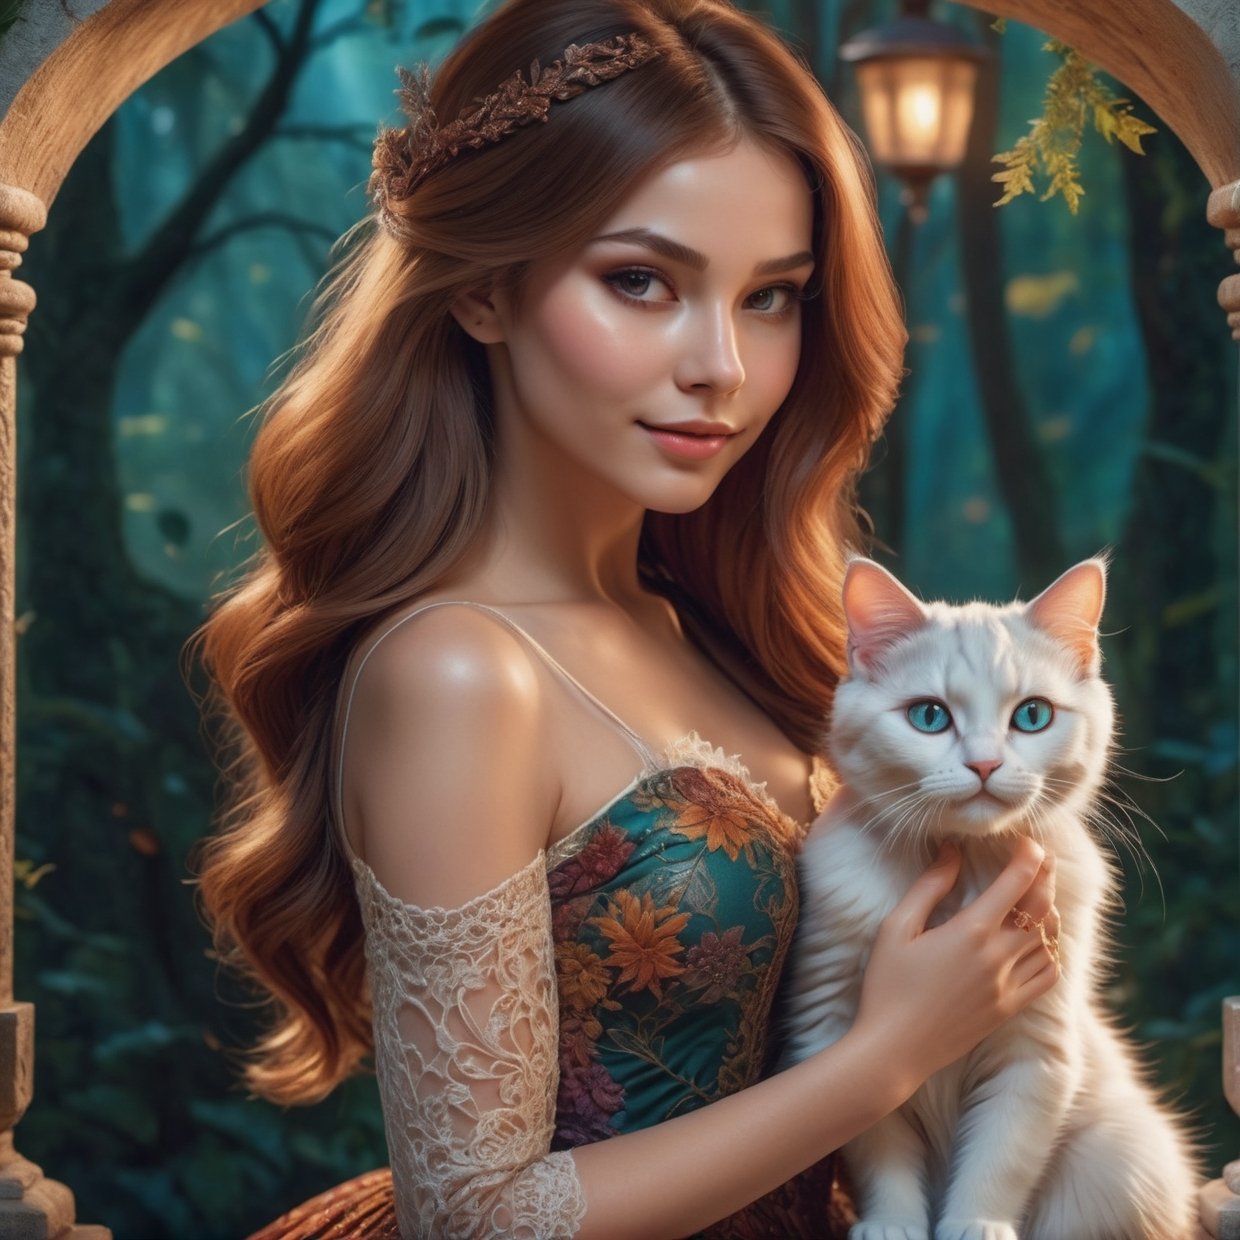  A beautiful girl with a cute cat, elegant dress, long flowing hair, detailed facial features, intricate lace pattern on dress, warm lighting, magical fantasy forest background, highly detailed, 8K, photorealistic, vibrant colors, dramatic composition